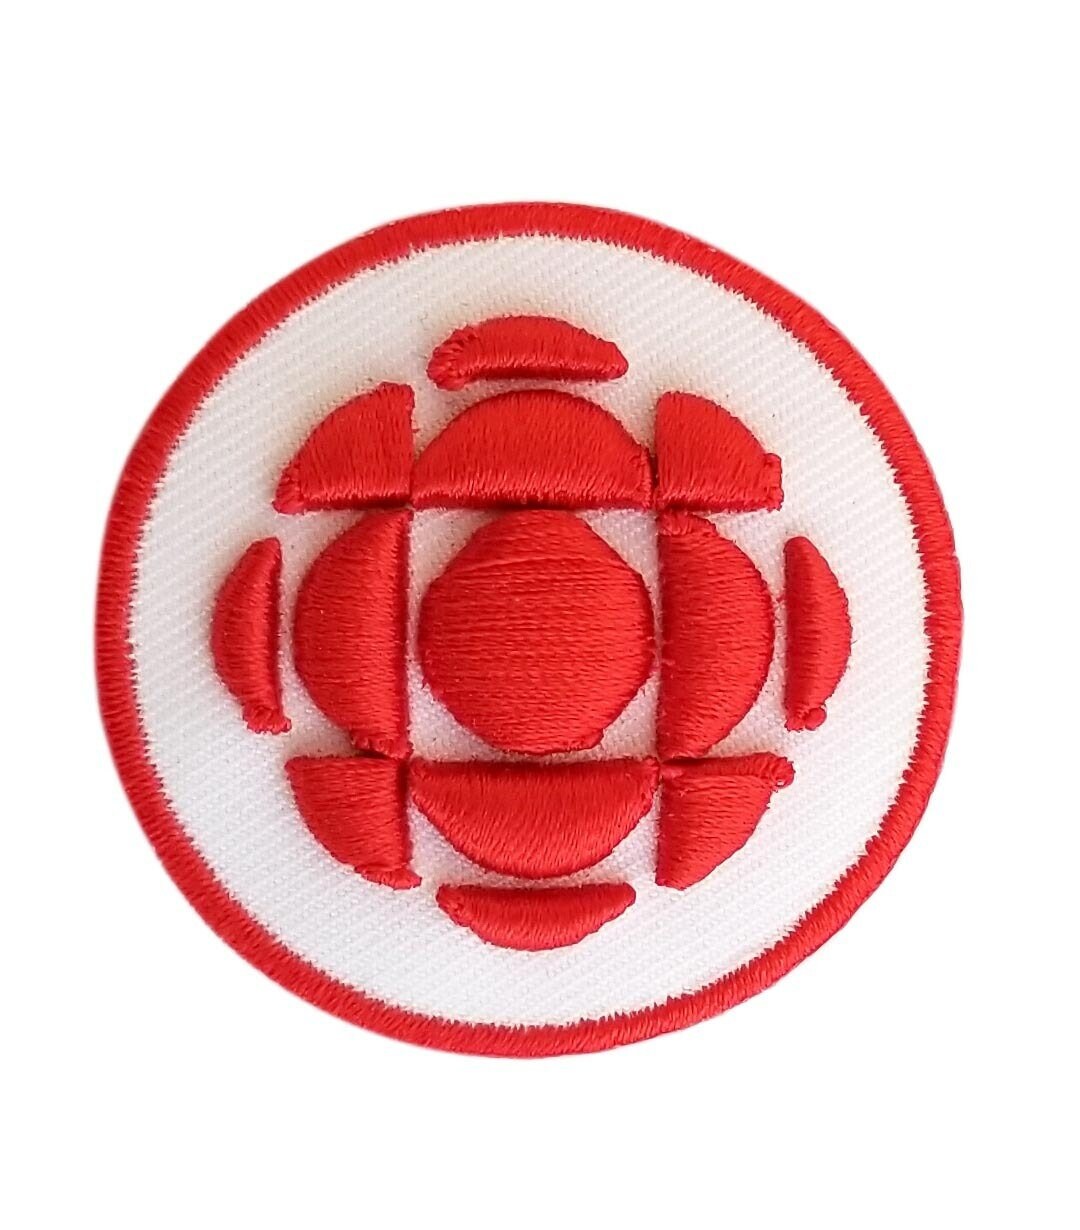 CBC Red Logo Iron on Woven Patch CBC Radio Canada Sew on Patch CBC